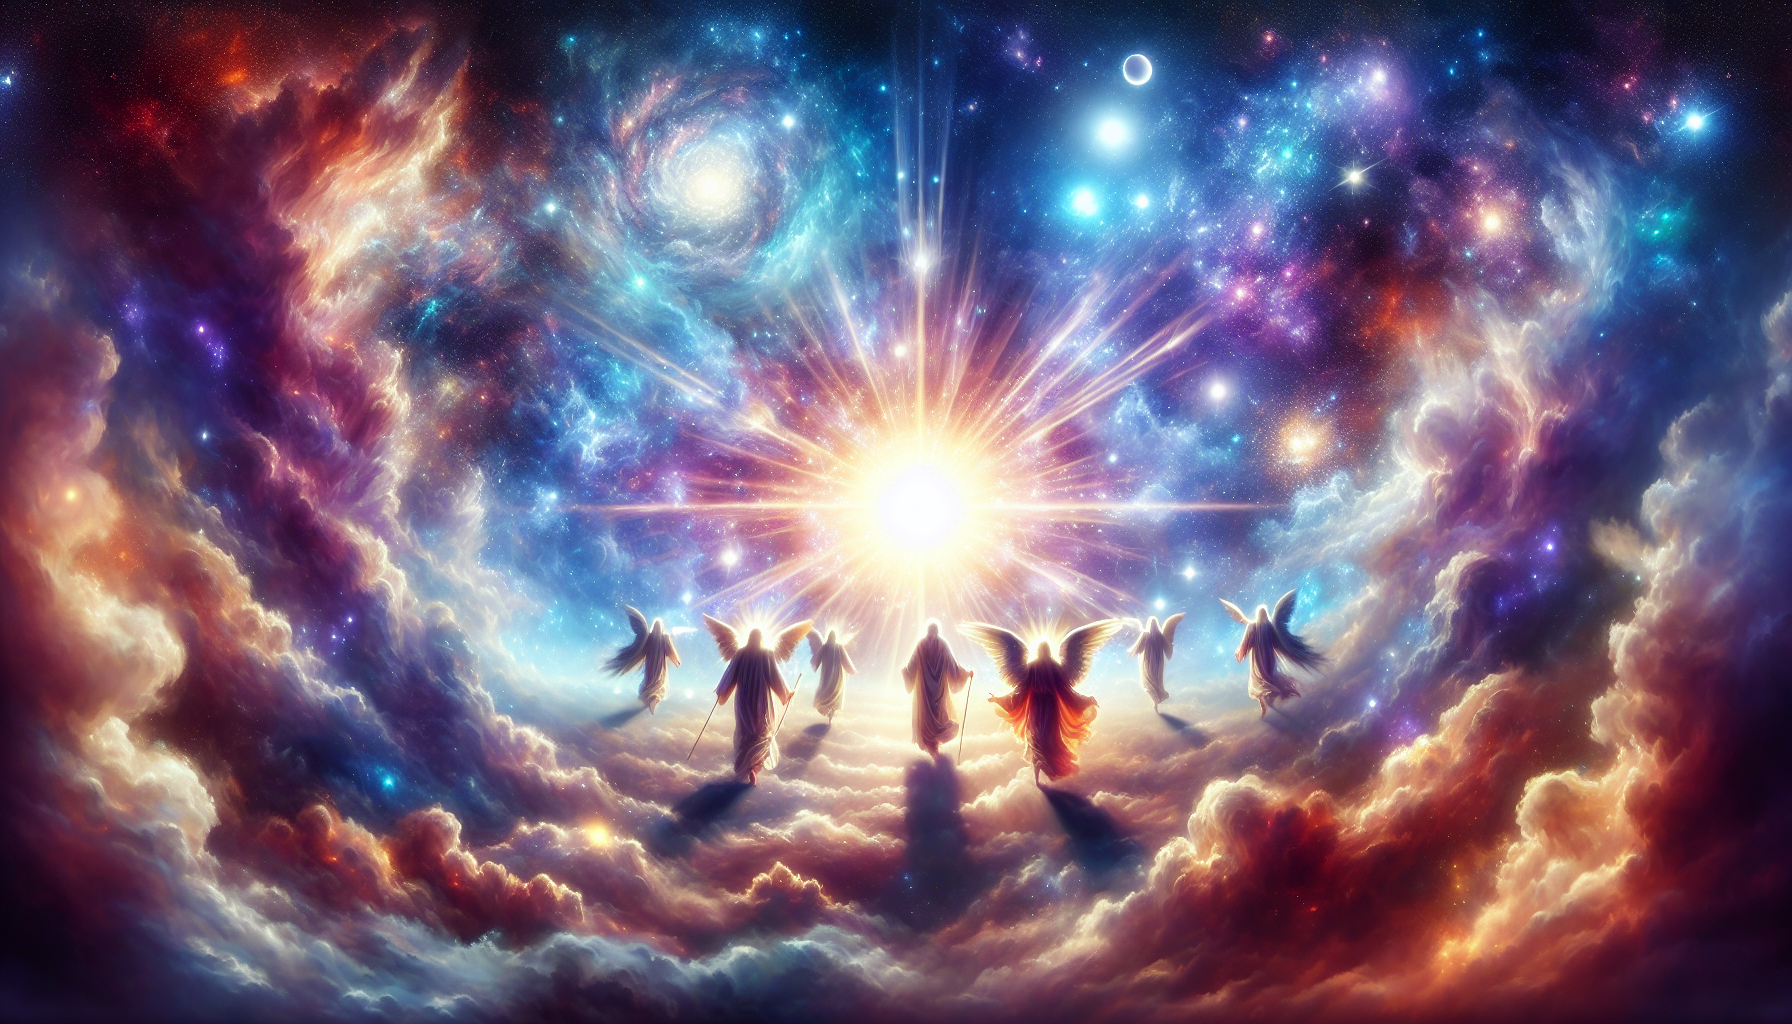 An ethereal landscape depicting the journey of a soul, with angels guiding it towards a radiant heavenly light, set in a celestial realm filled with clouds and stars, as described in biblical scriptur